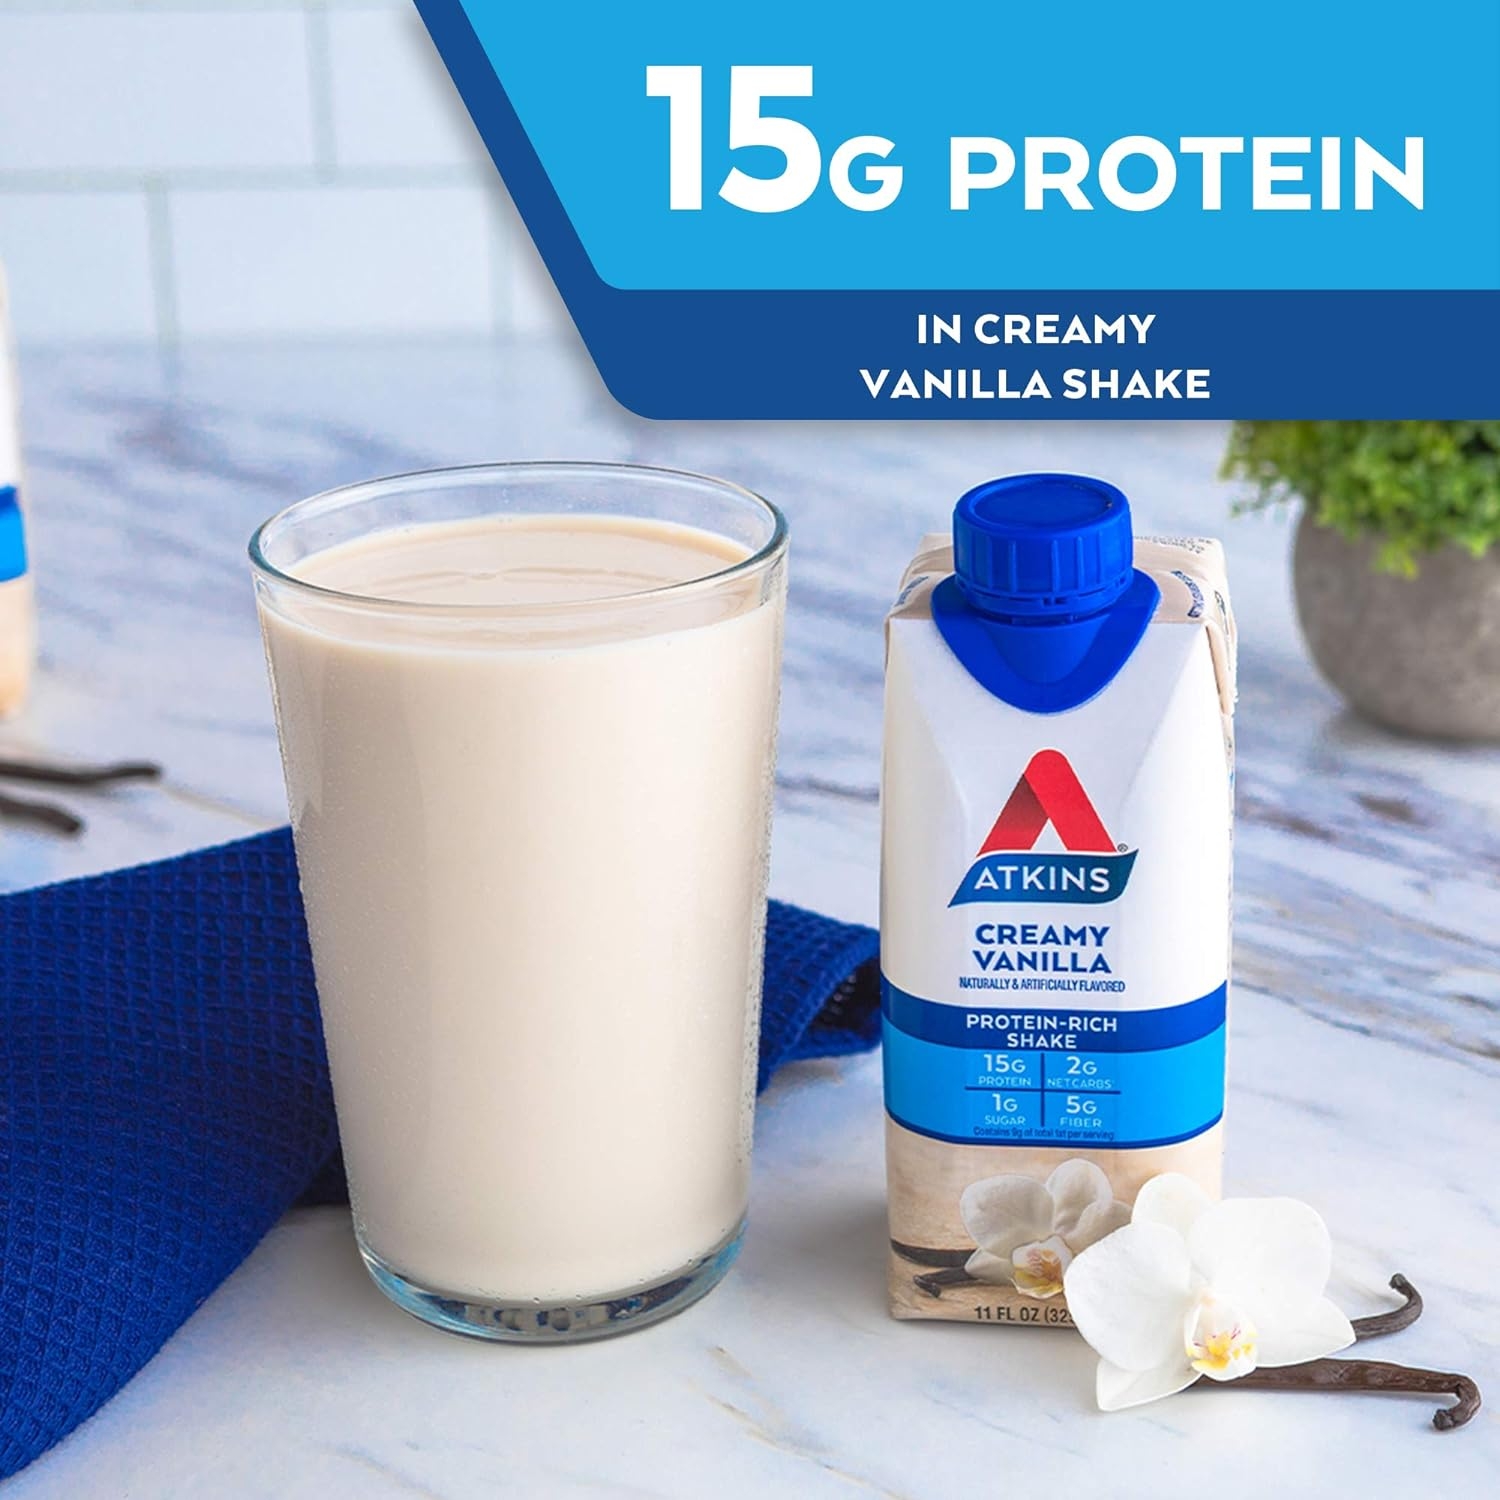 Atkins Gluten Free Protein-Rich Shake, Creamy/French Vanilla, Keto Friendly, (Packaging may vary) , 11 Fl Oz (Pack of 4)